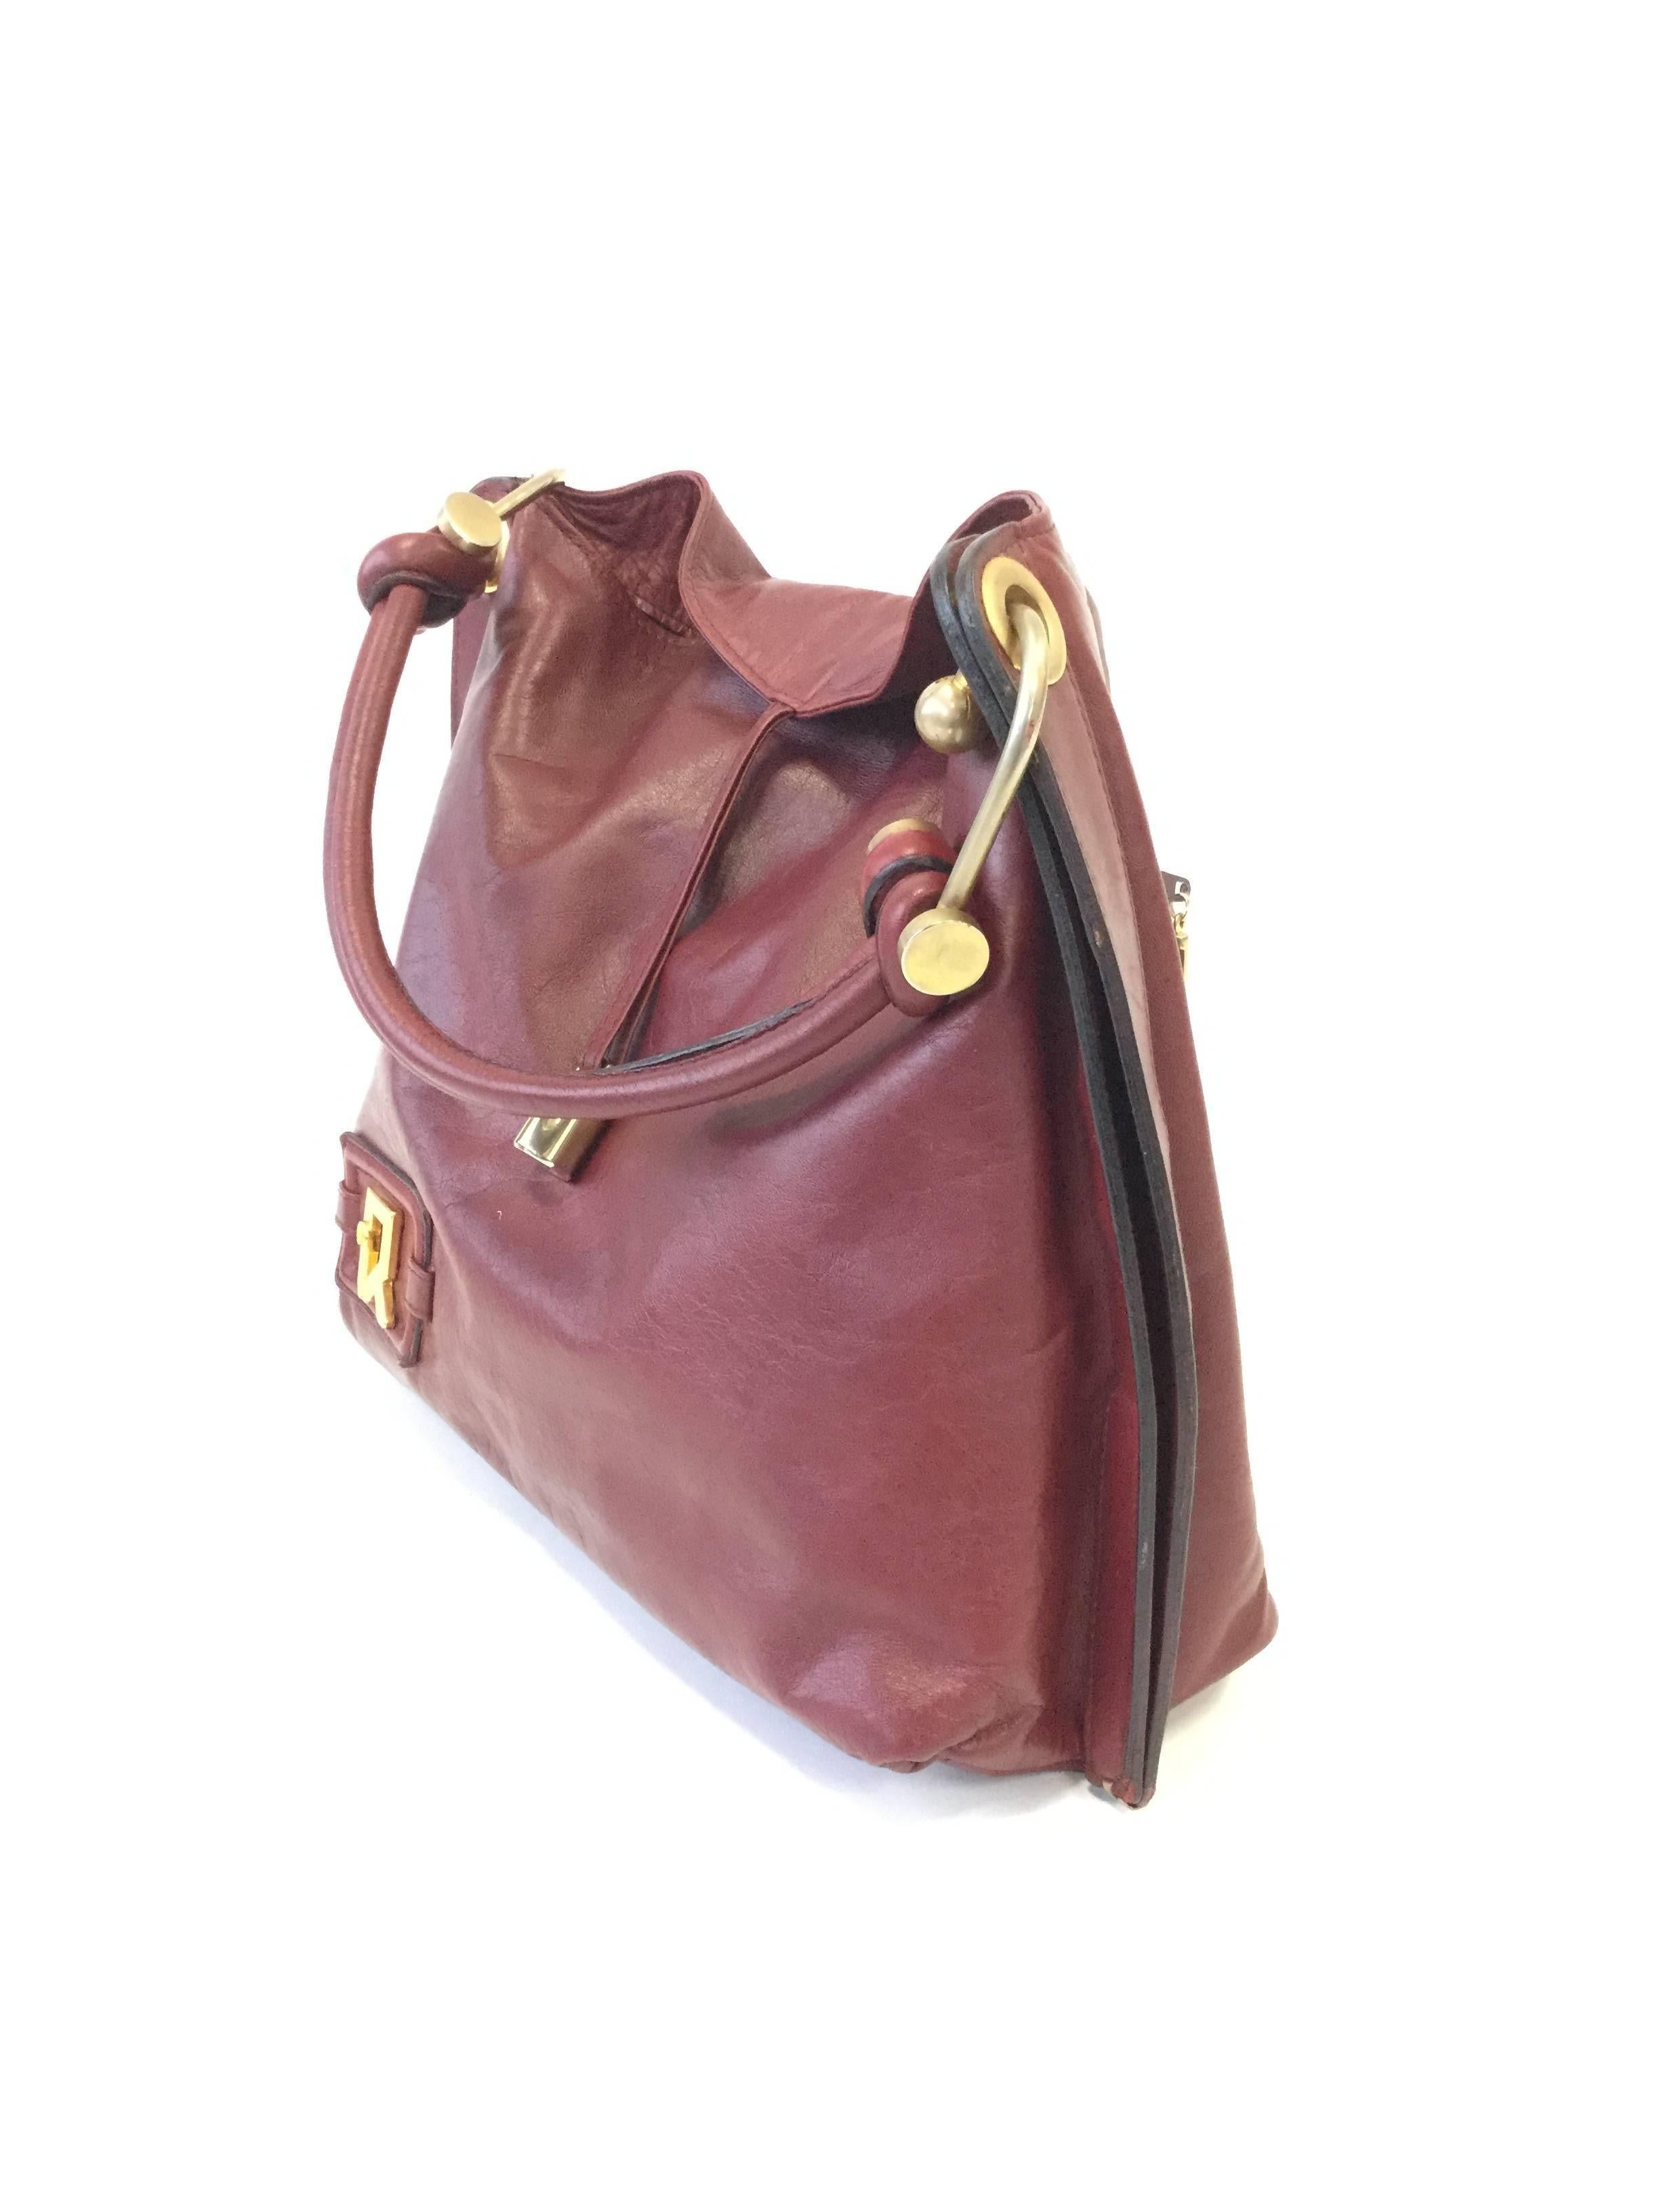 
Undeniably chic tote by Roberta di Camerino! This oxblood leather tote has a soft body stitched together leaving a thick section of leather at the side. The tote features a weighty lock-like piece of hardware suspended from a strand of leather;